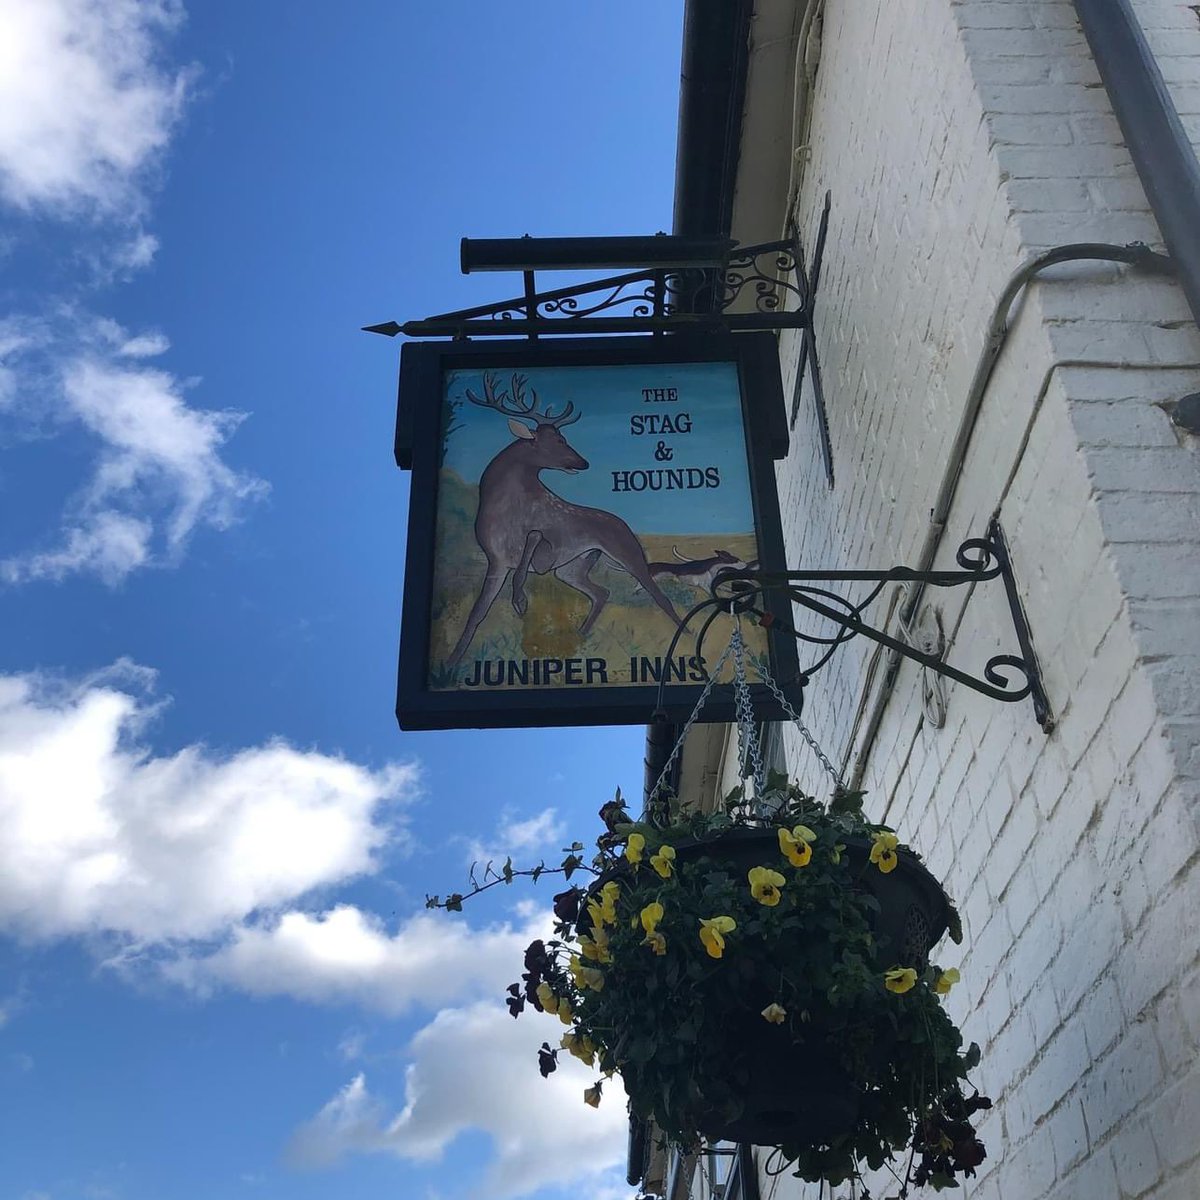 Chef Dom Clarke is bidding farewell to The Stag & Hounds, Burrough on the Hill, Leics. 😢 Dom & his team's talent earned the pub a Michelin Bib Gourmand. We named them our Pub of the Year 2020/1. Dom is planning his next move. The pub is awaiting a new licensee & remains open